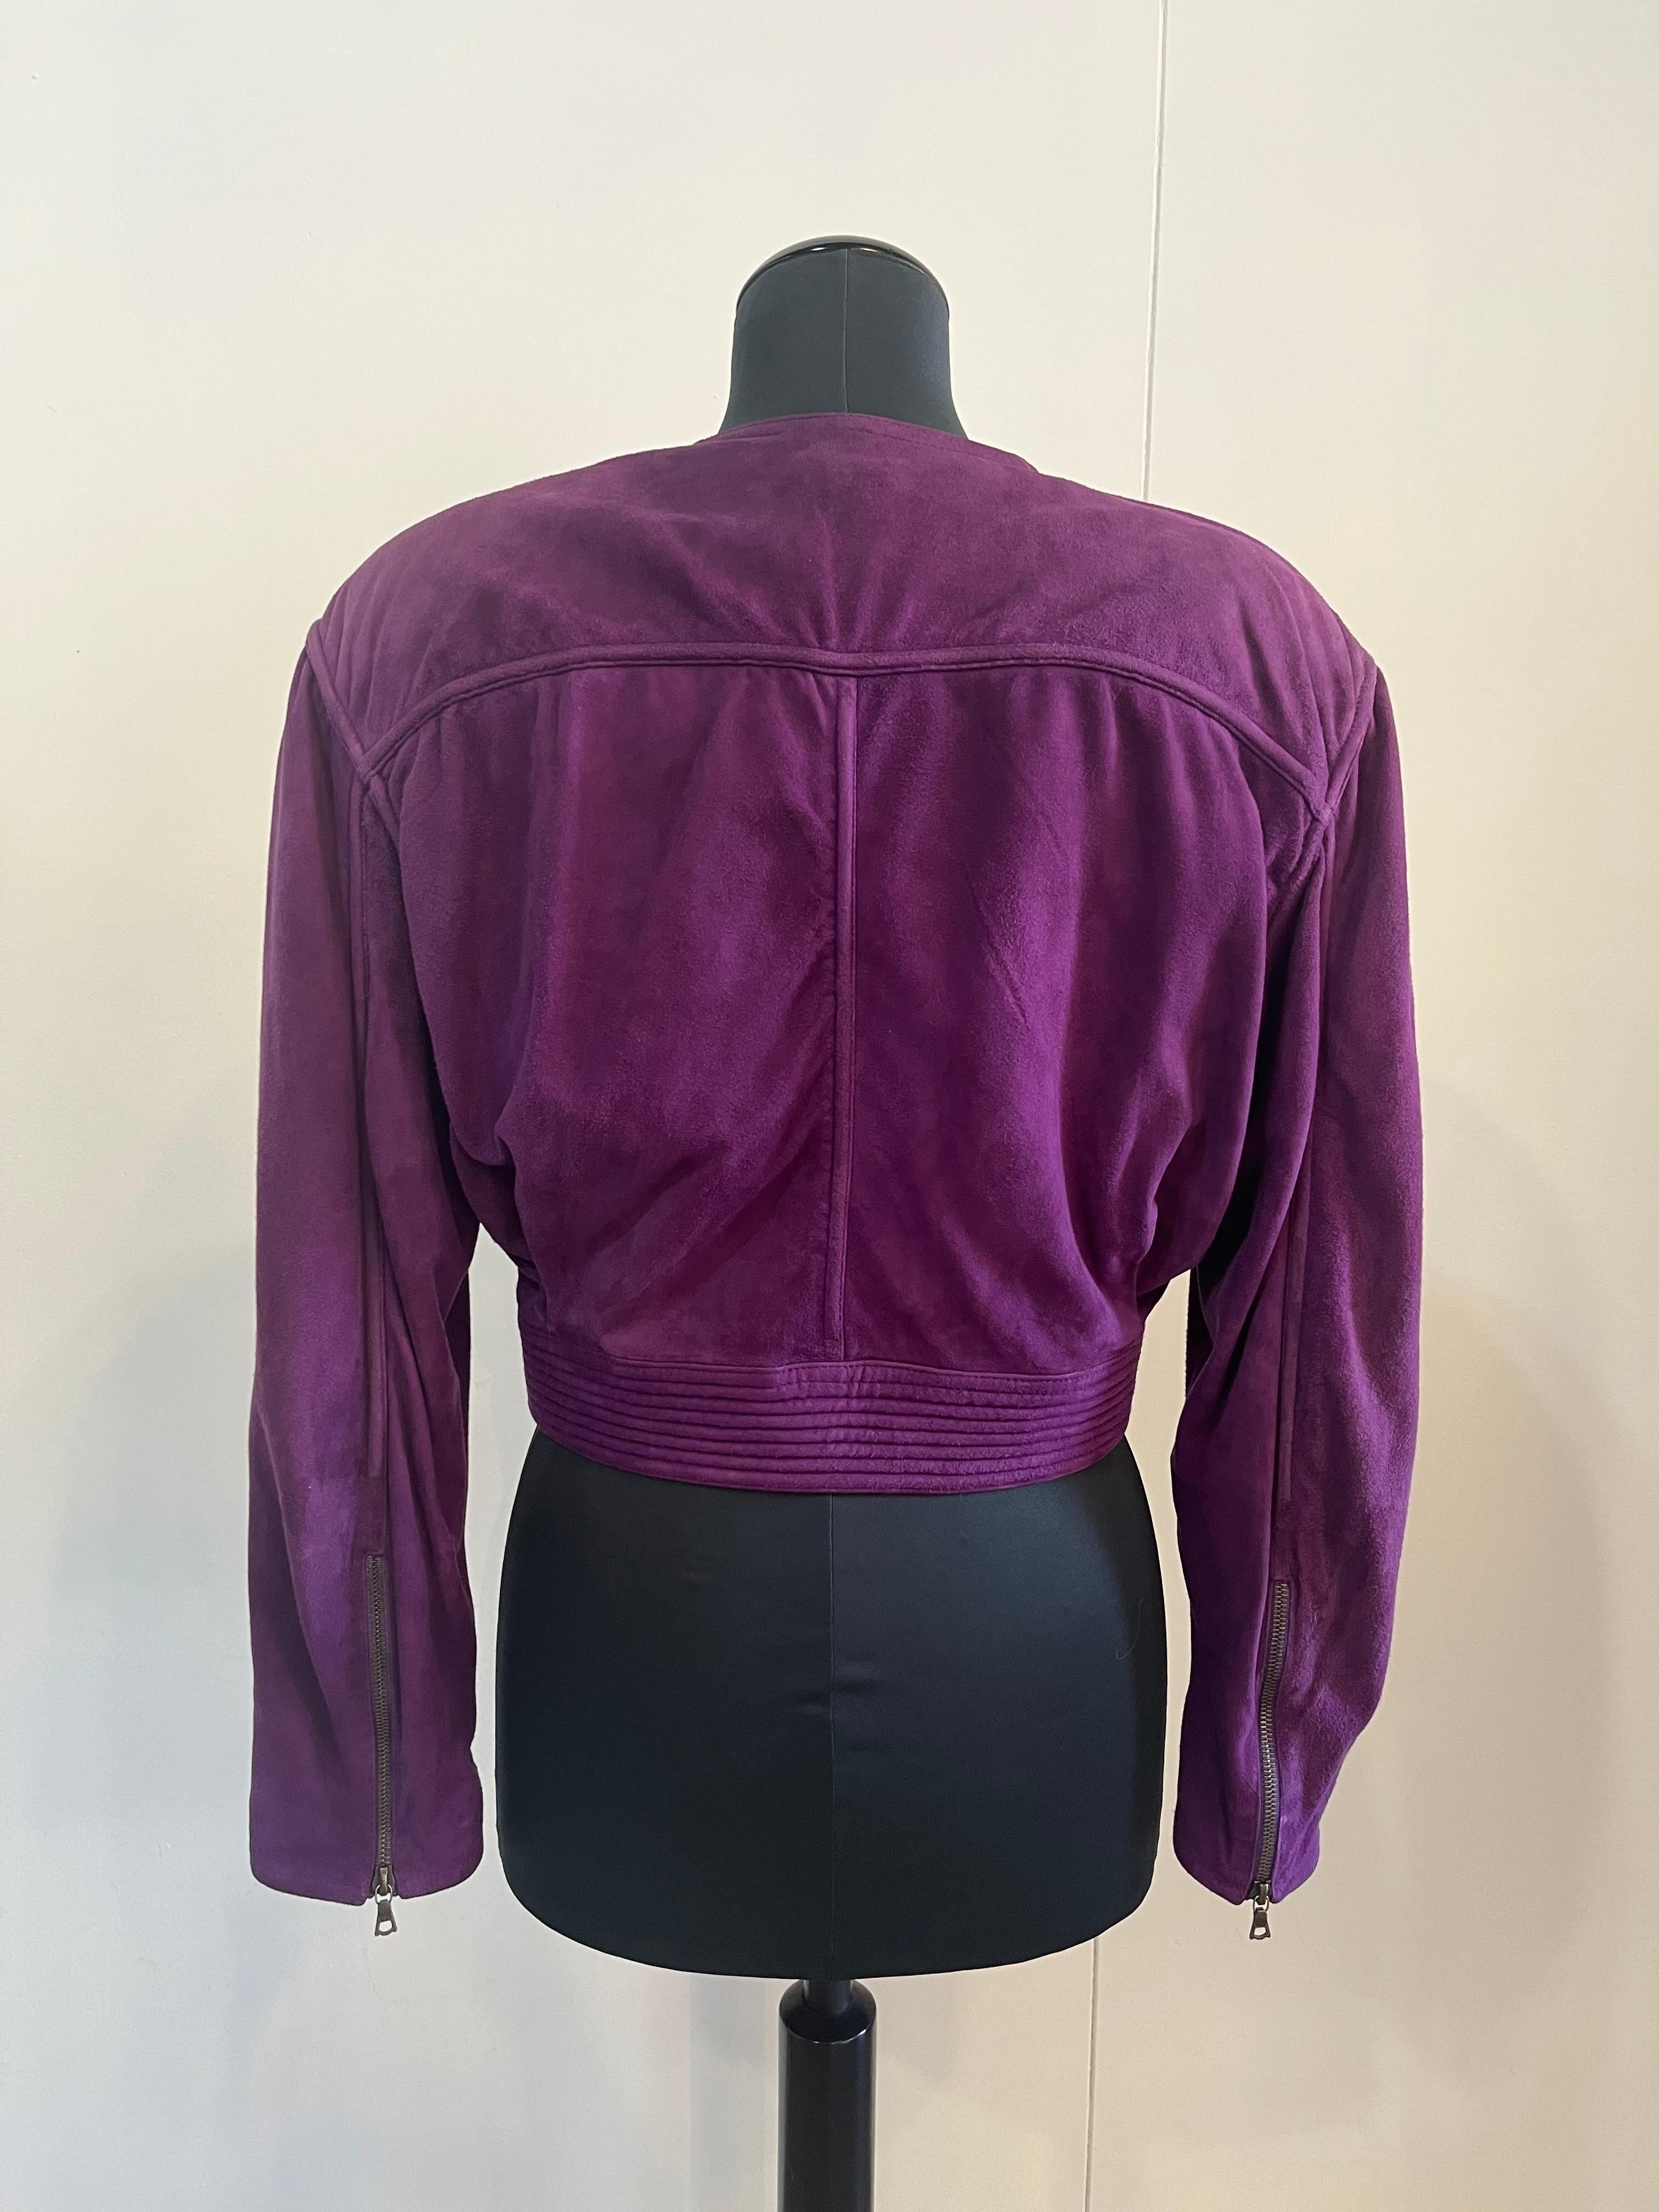 Purple Gianni Versace vintage jacket from 80s For Sale